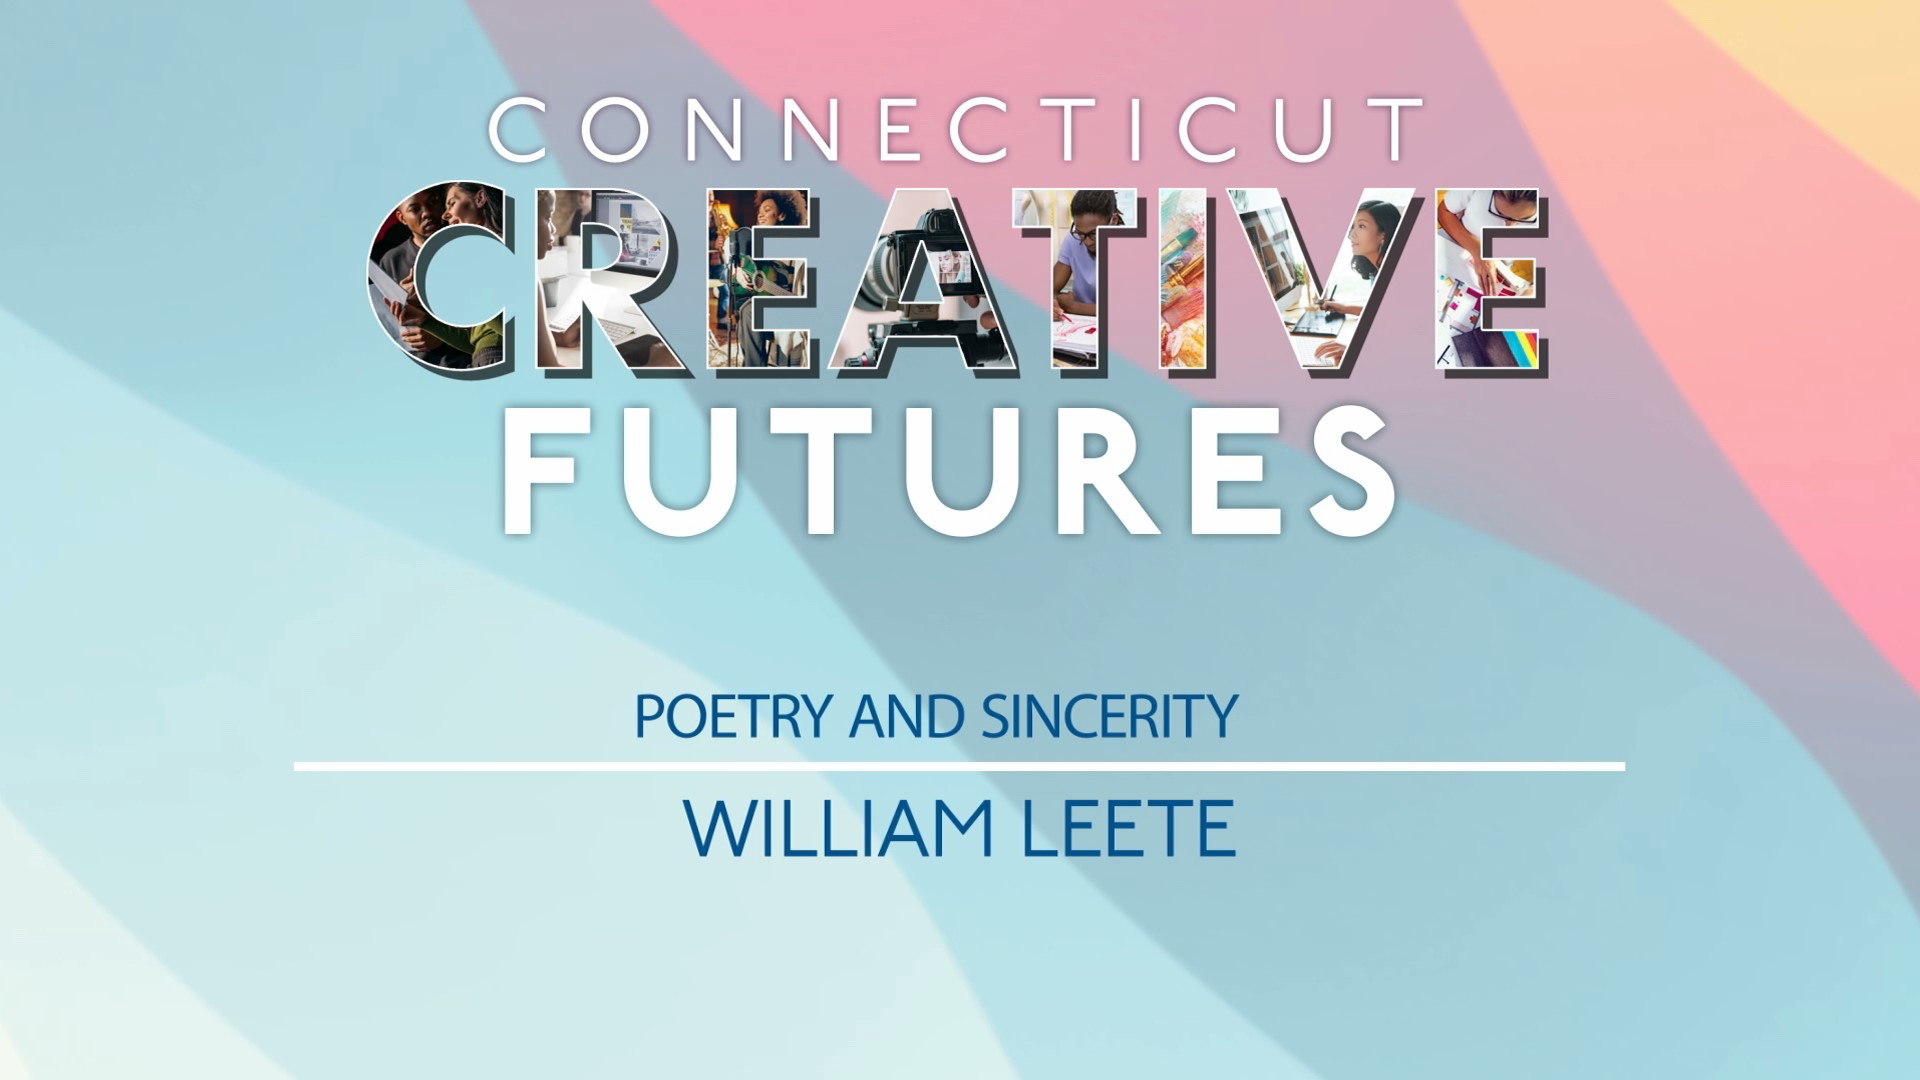 William Leete, CT's 2022 Poetry Out Loud State Champion, explains sincerity and poetry